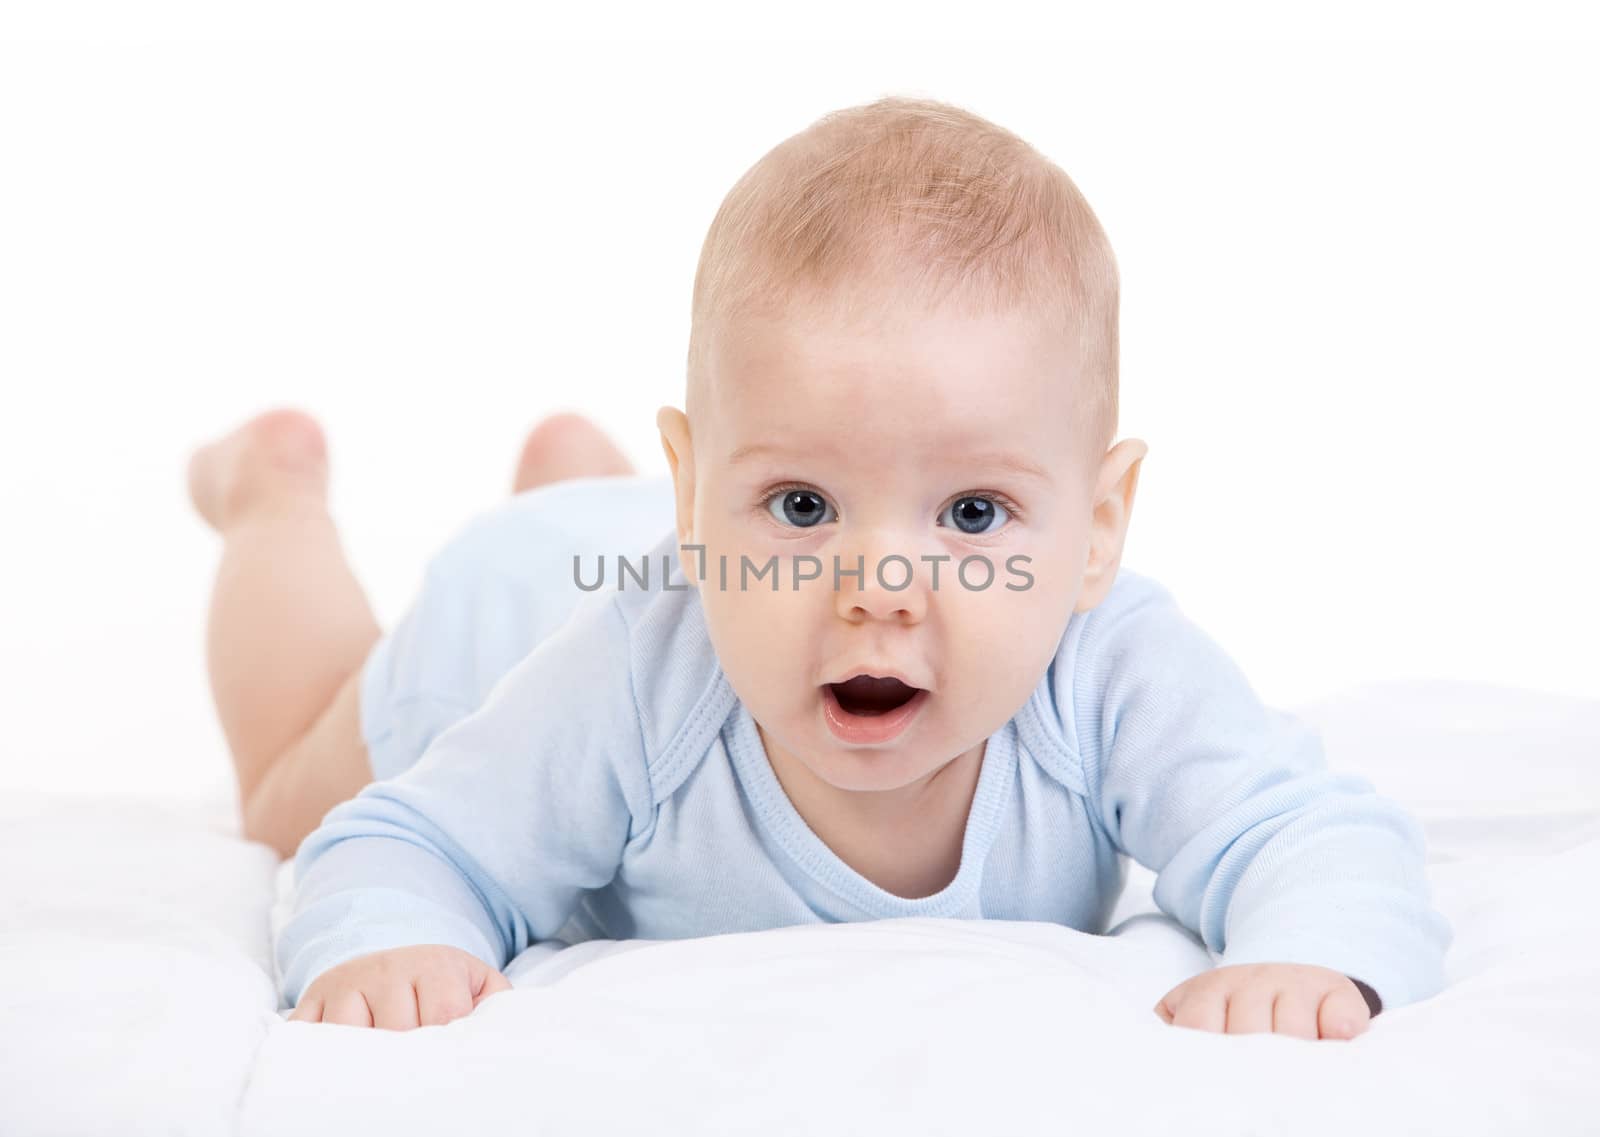 Little boy lying on stomach and looking at camera over white background